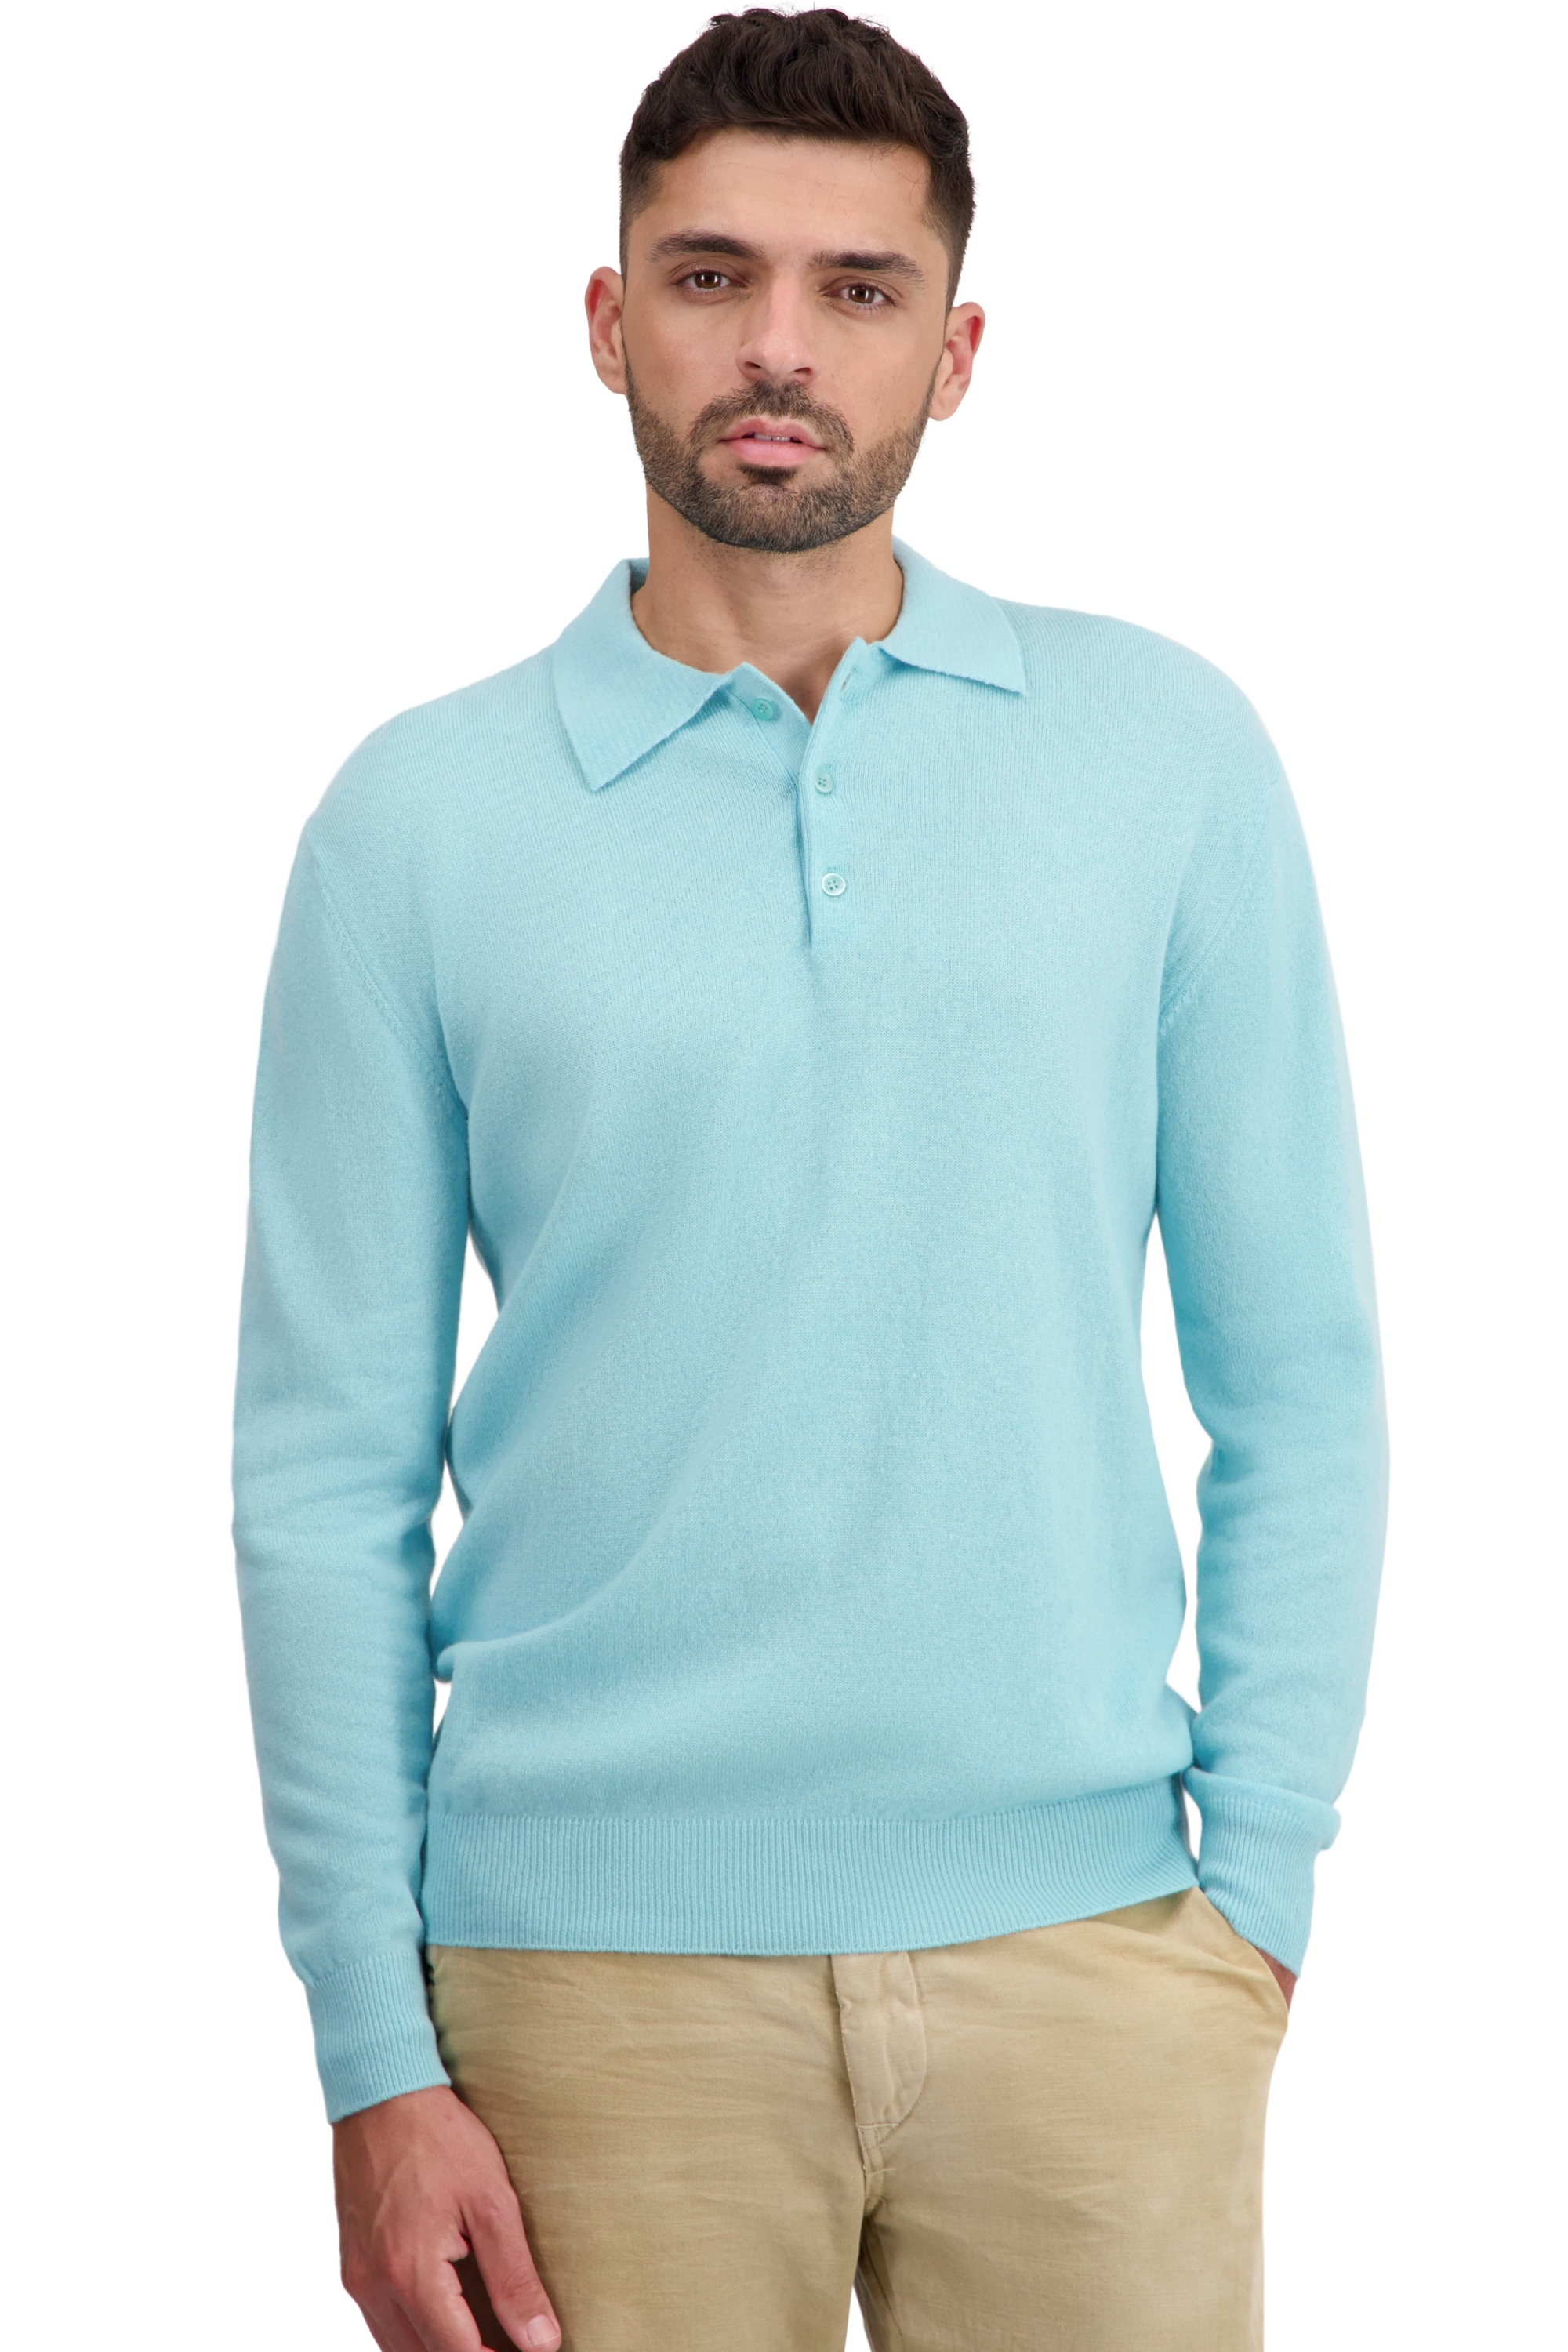 Cashmere men basic sweaters at low prices tarn first aquilia xl